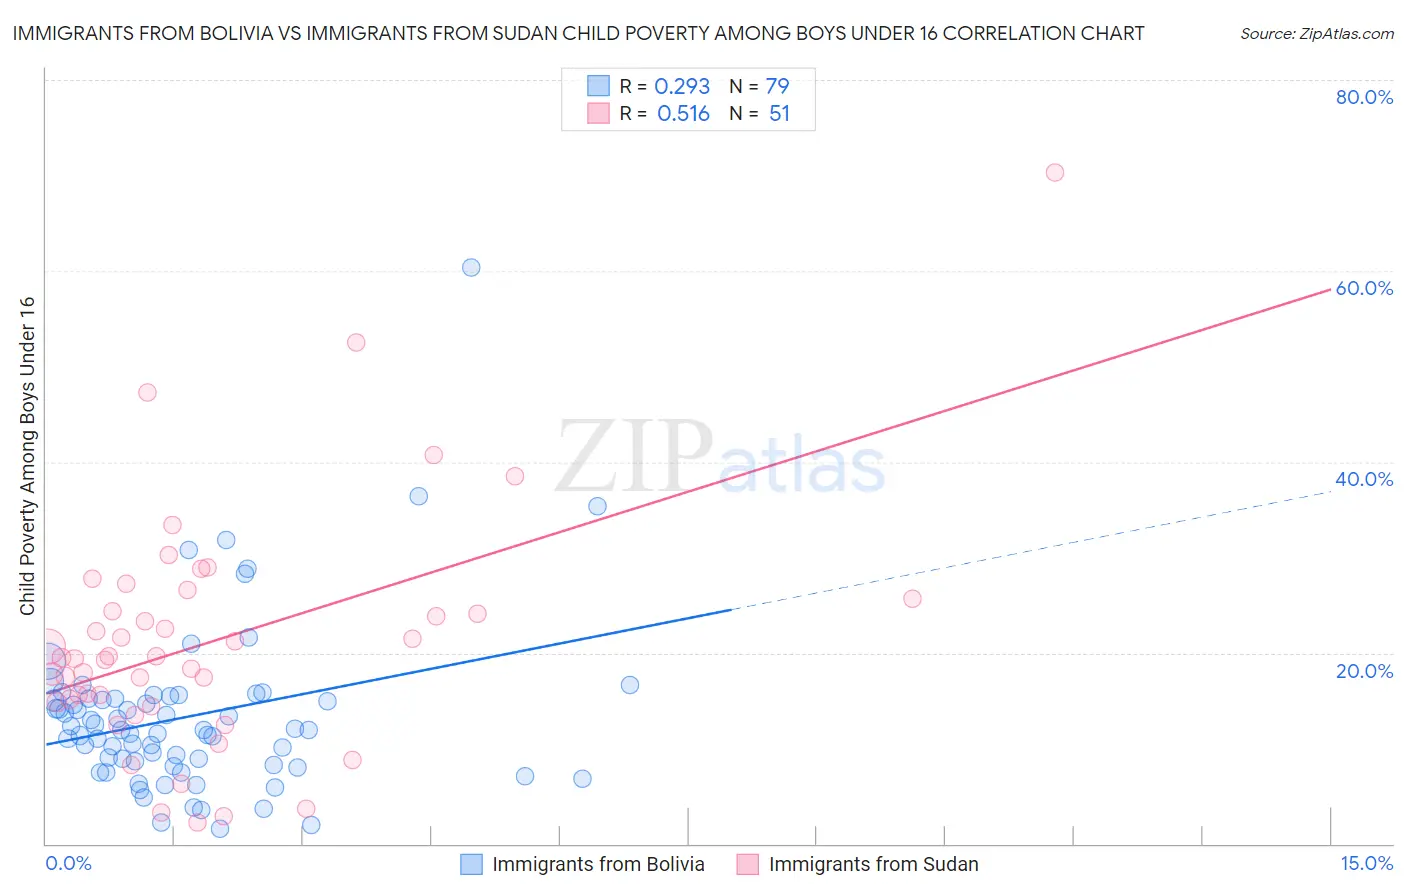 Immigrants from Bolivia vs Immigrants from Sudan Child Poverty Among Boys Under 16